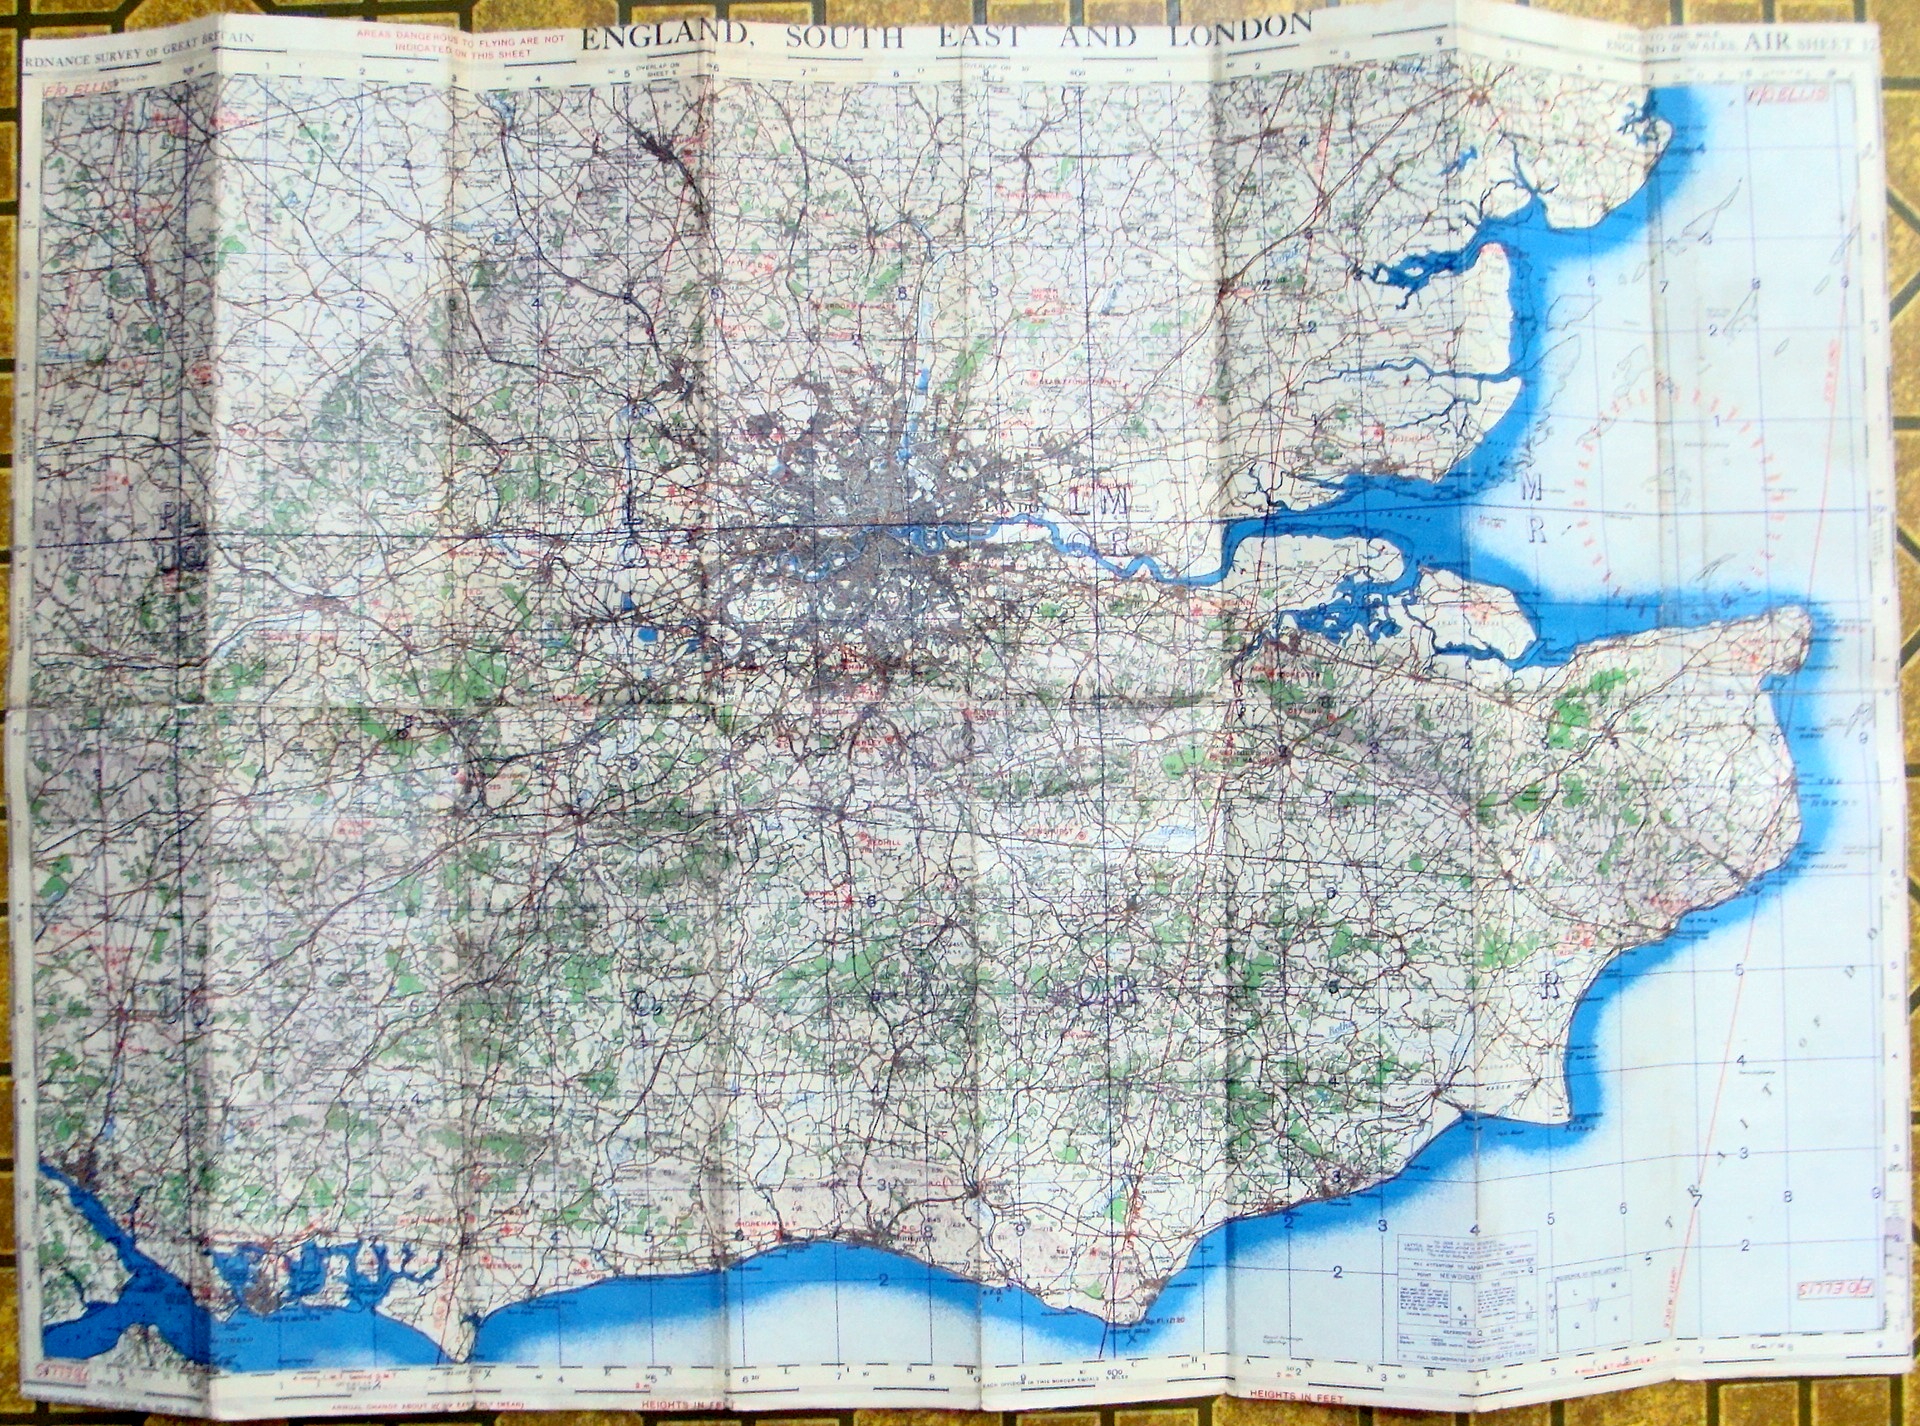 ORDNANCE SURVEY OF GREAT BRITAIN - England, South East and London World War II Map: England & Wales Air Sheet 12